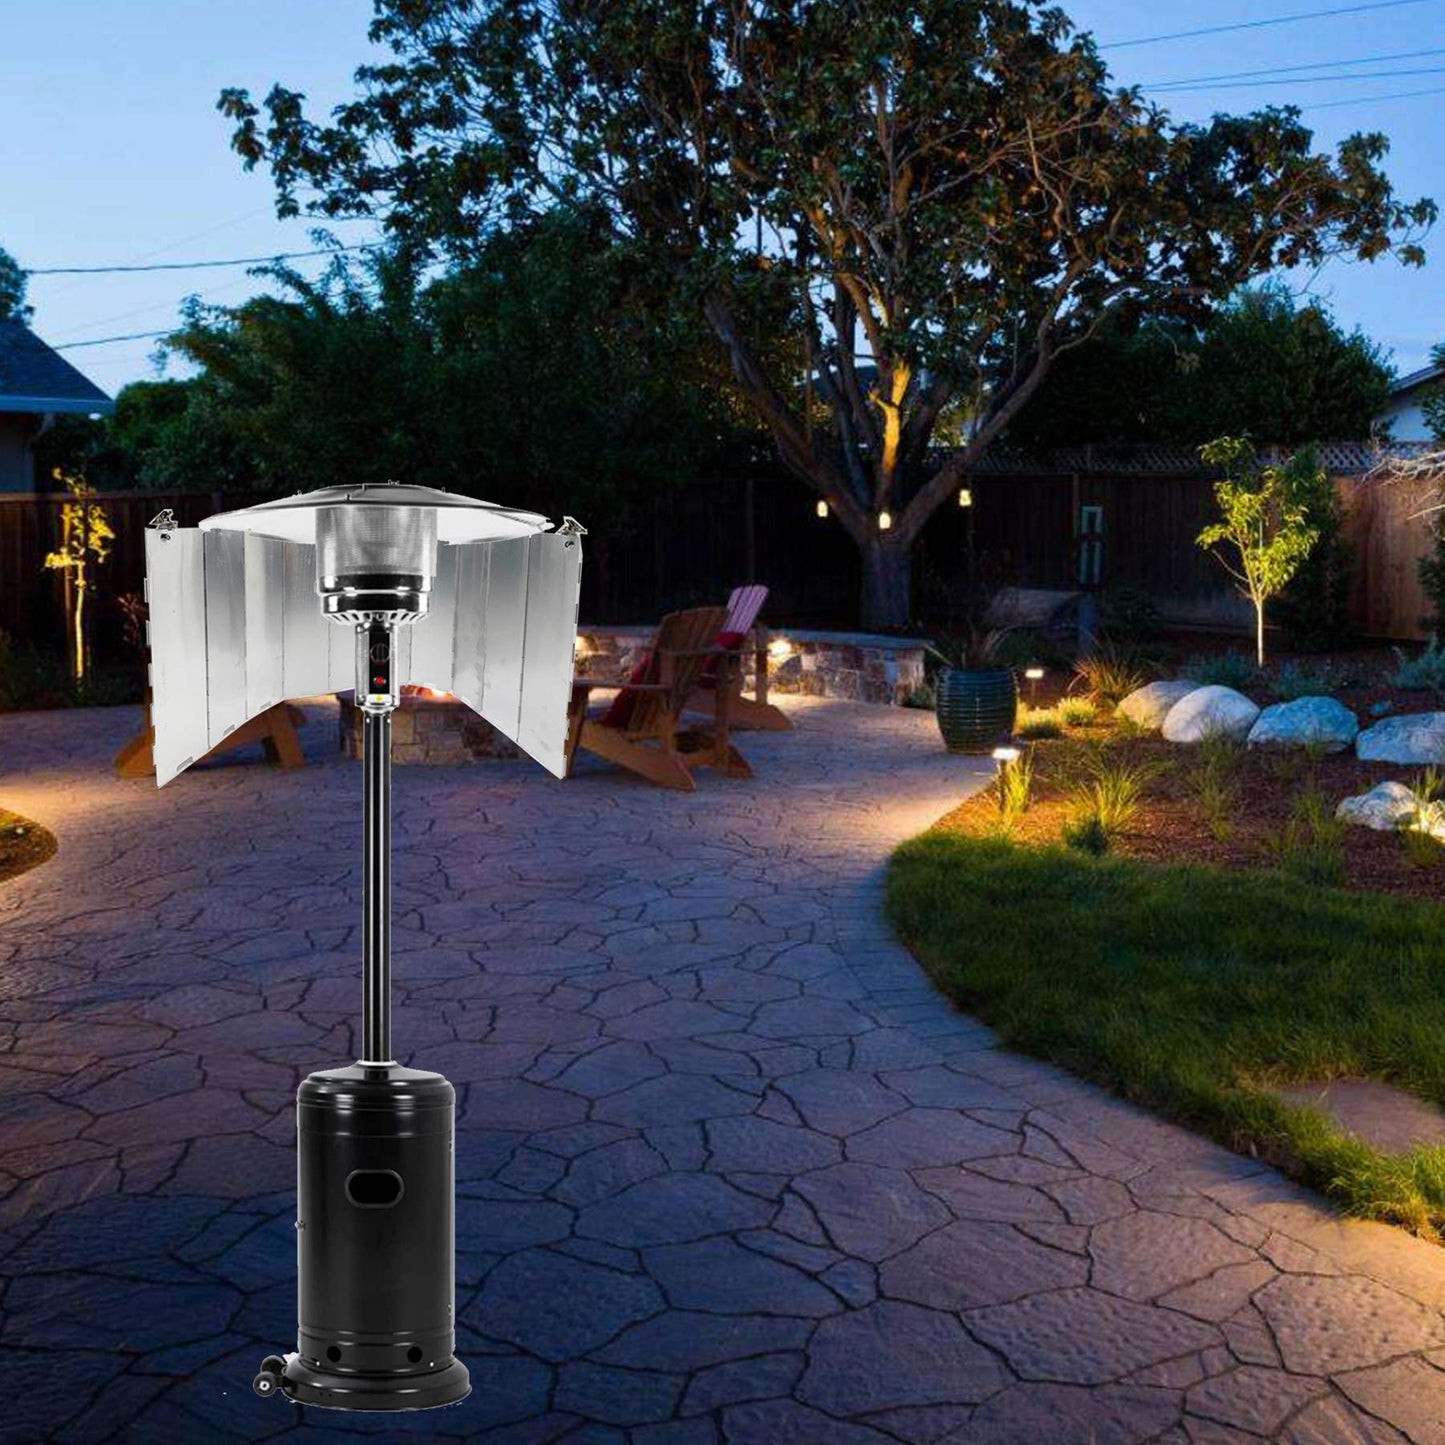 KYZETJD Outdoor Heater Focusing Reflector for Round Natural Gas Propane Patio Heaters